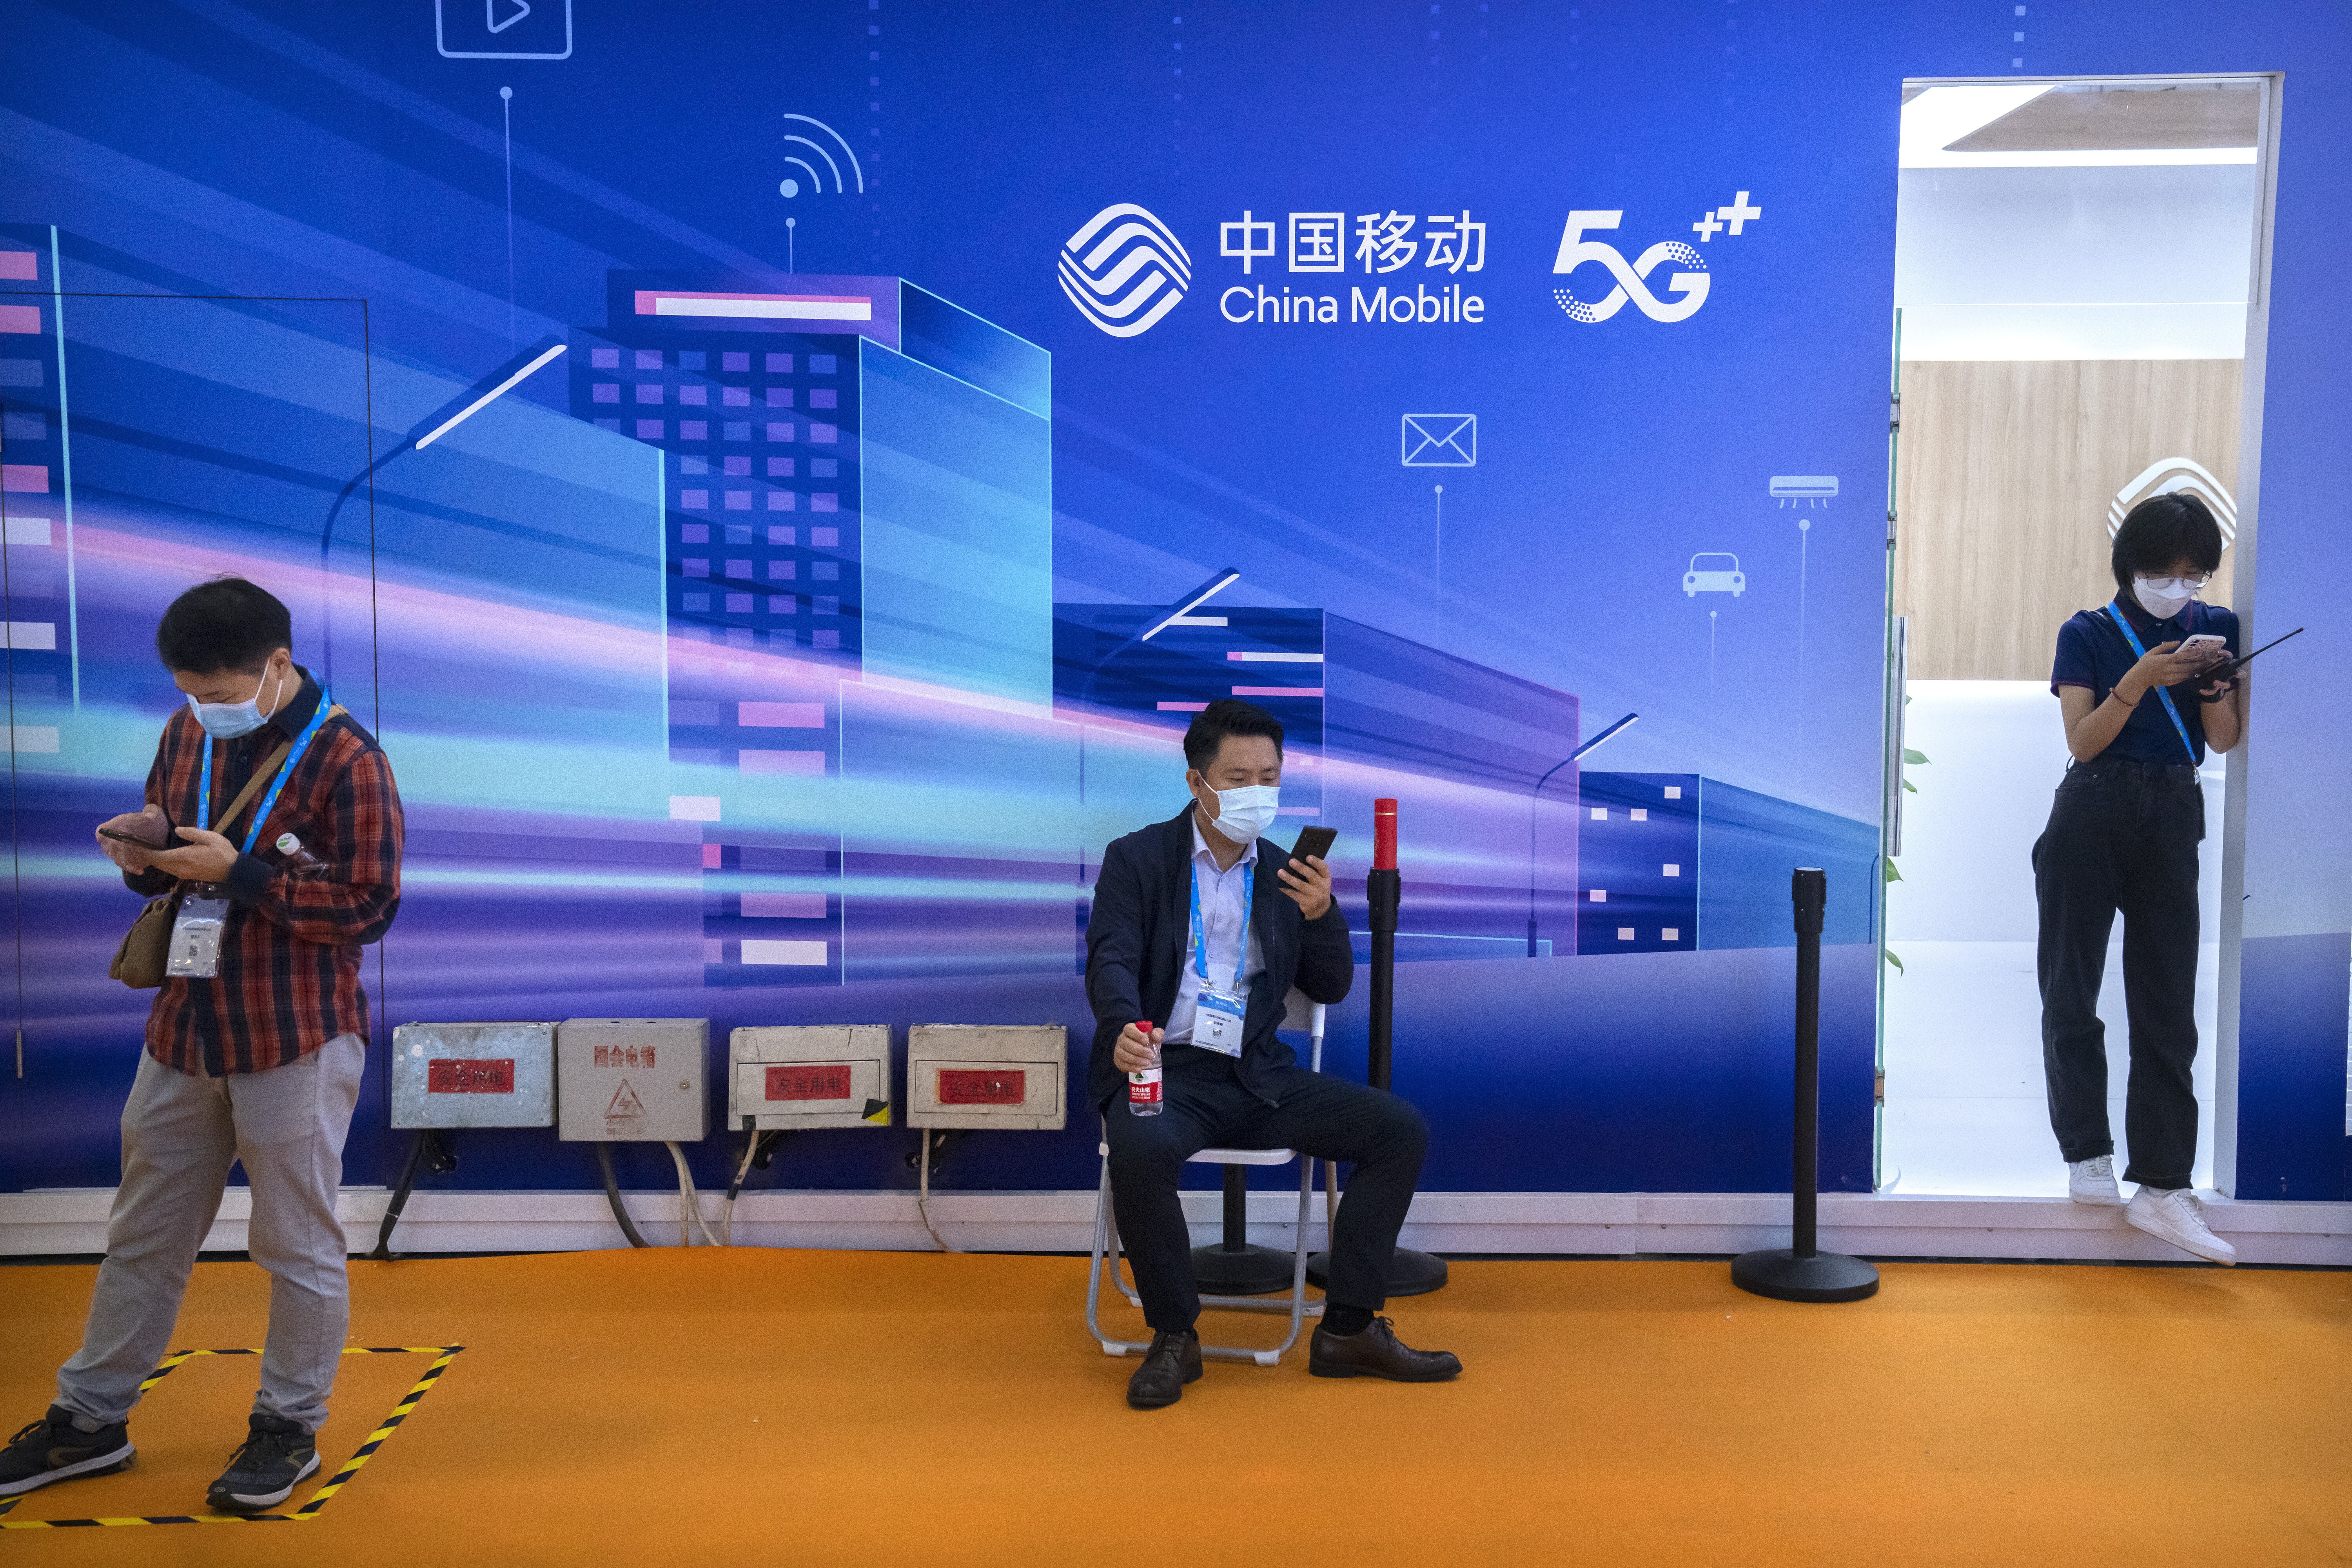 Attendees use their smartphones near China Mobile’s booth at the China International Information and Communication Exhibition, an annual event known as PT Expo China, in Beijing on September 28, 2021. Photo: AP